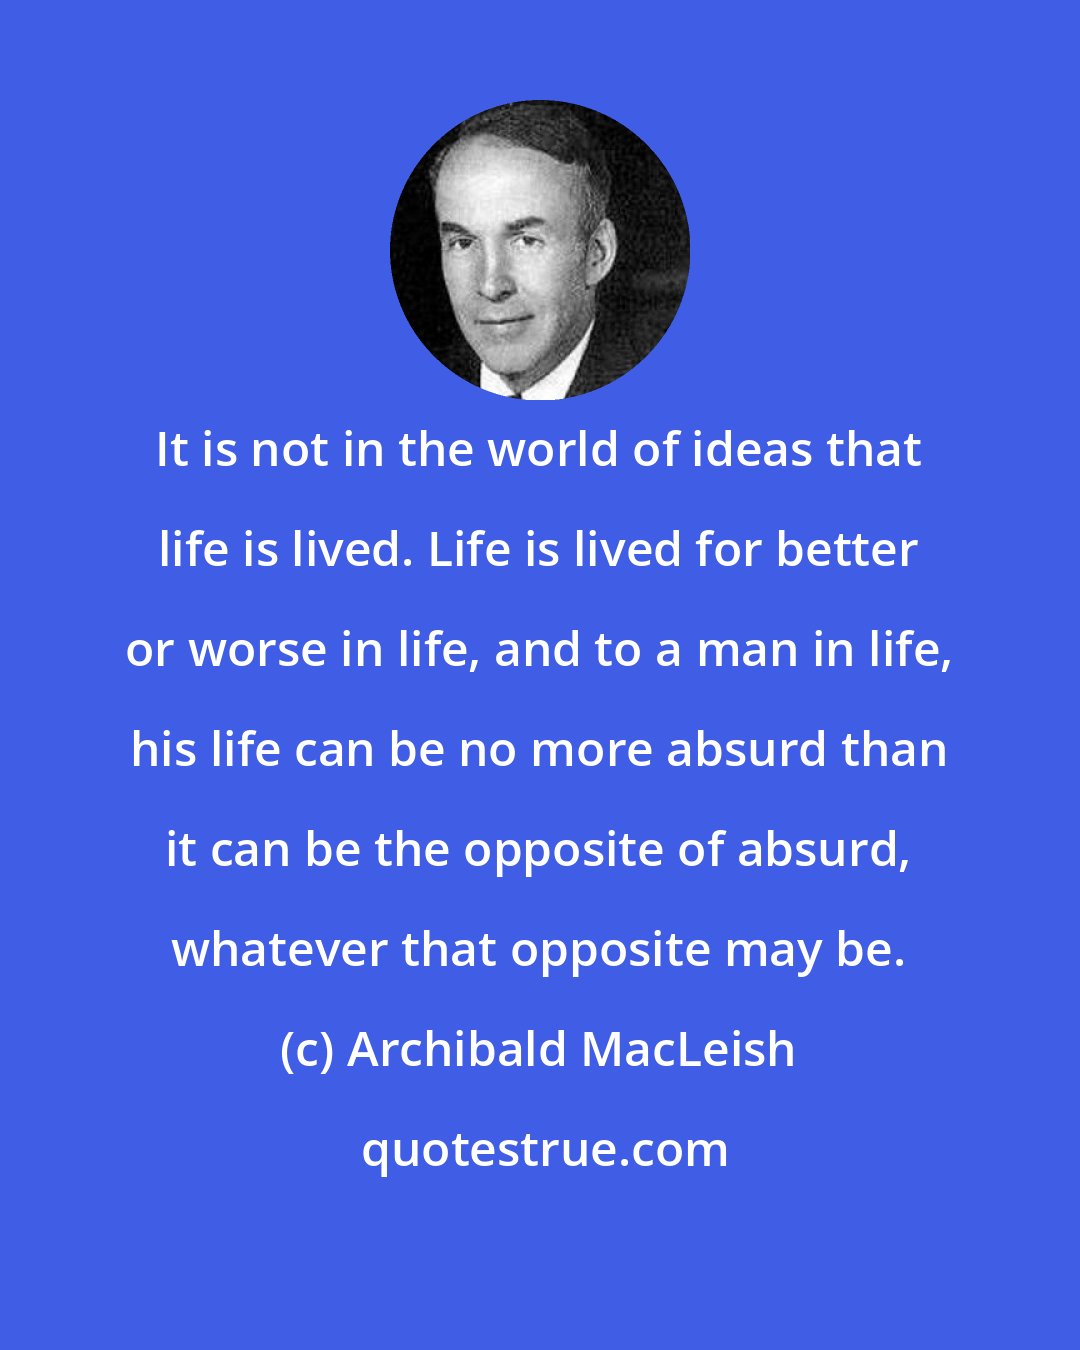 Archibald MacLeish: It is not in the world of ideas that life is lived. Life is lived for better or worse in life, and to a man in life, his life can be no more absurd than it can be the opposite of absurd, whatever that opposite may be.